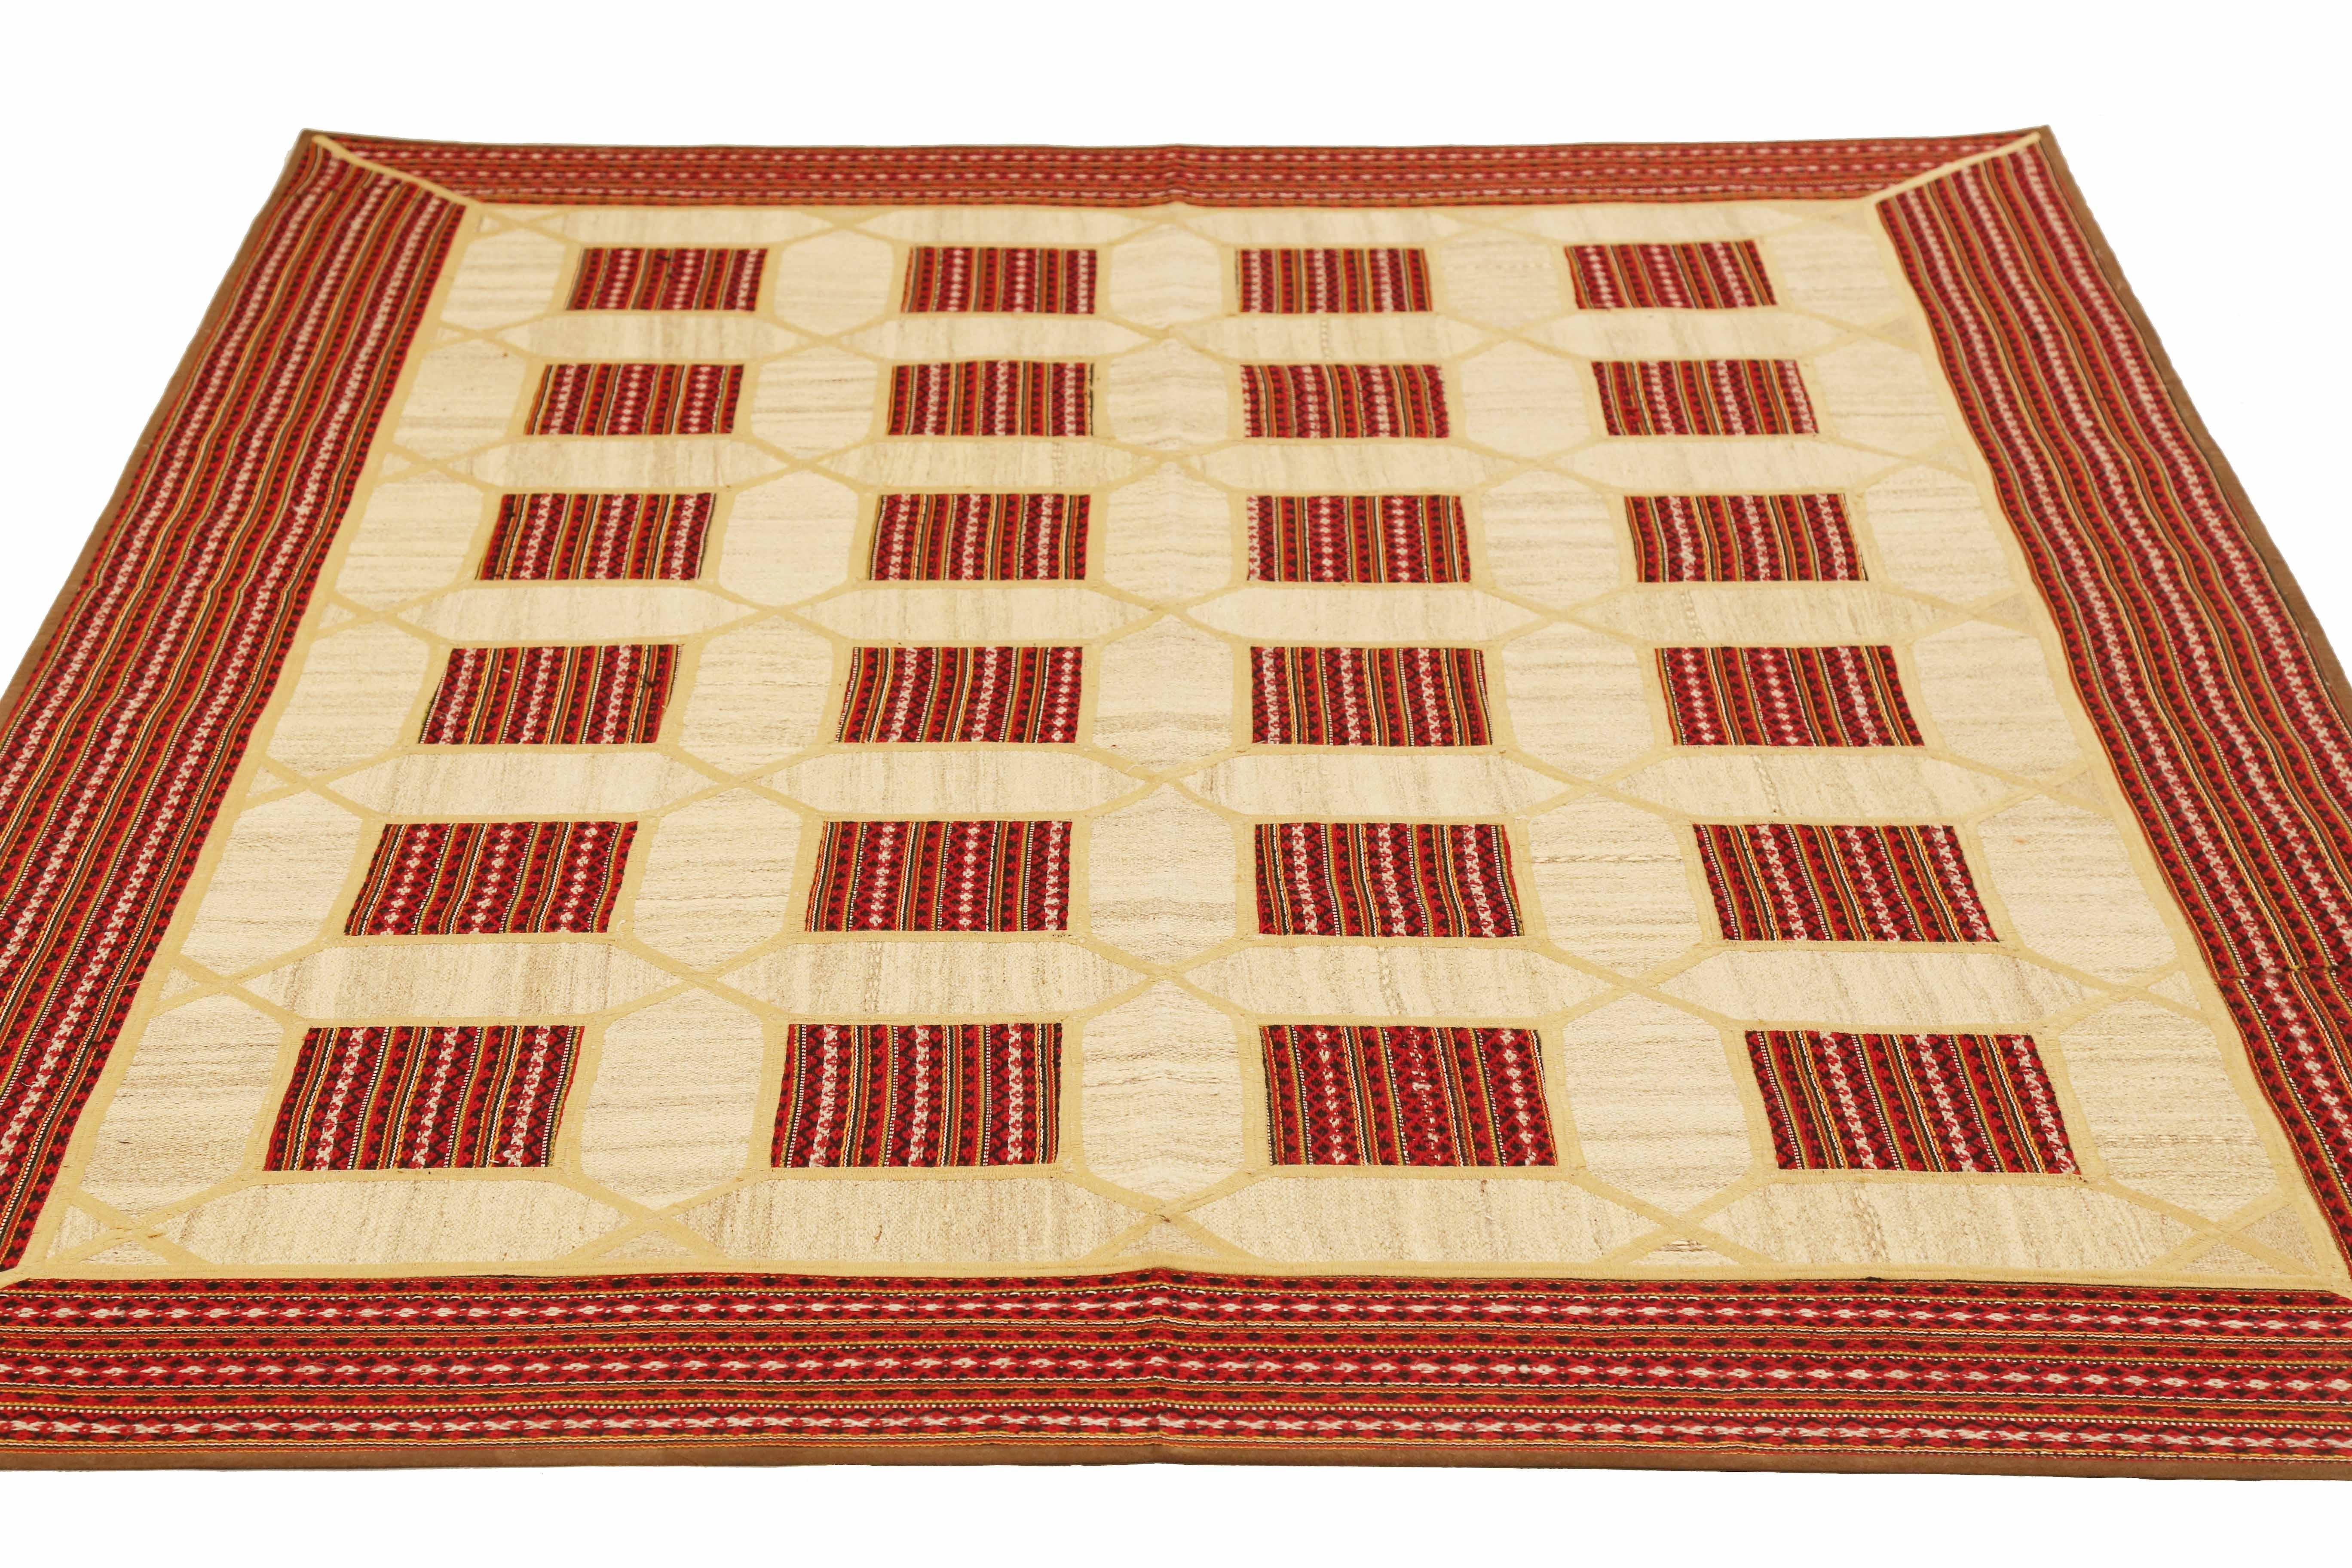 Modern Turkish rug handwoven from the finest sheep’s wool and colored with all-natural vegetable dyes that are safe for humans and pets. It’s a traditional Patch Kilim flat-weave design featuring square patterns in ivory on a red field. It’s a